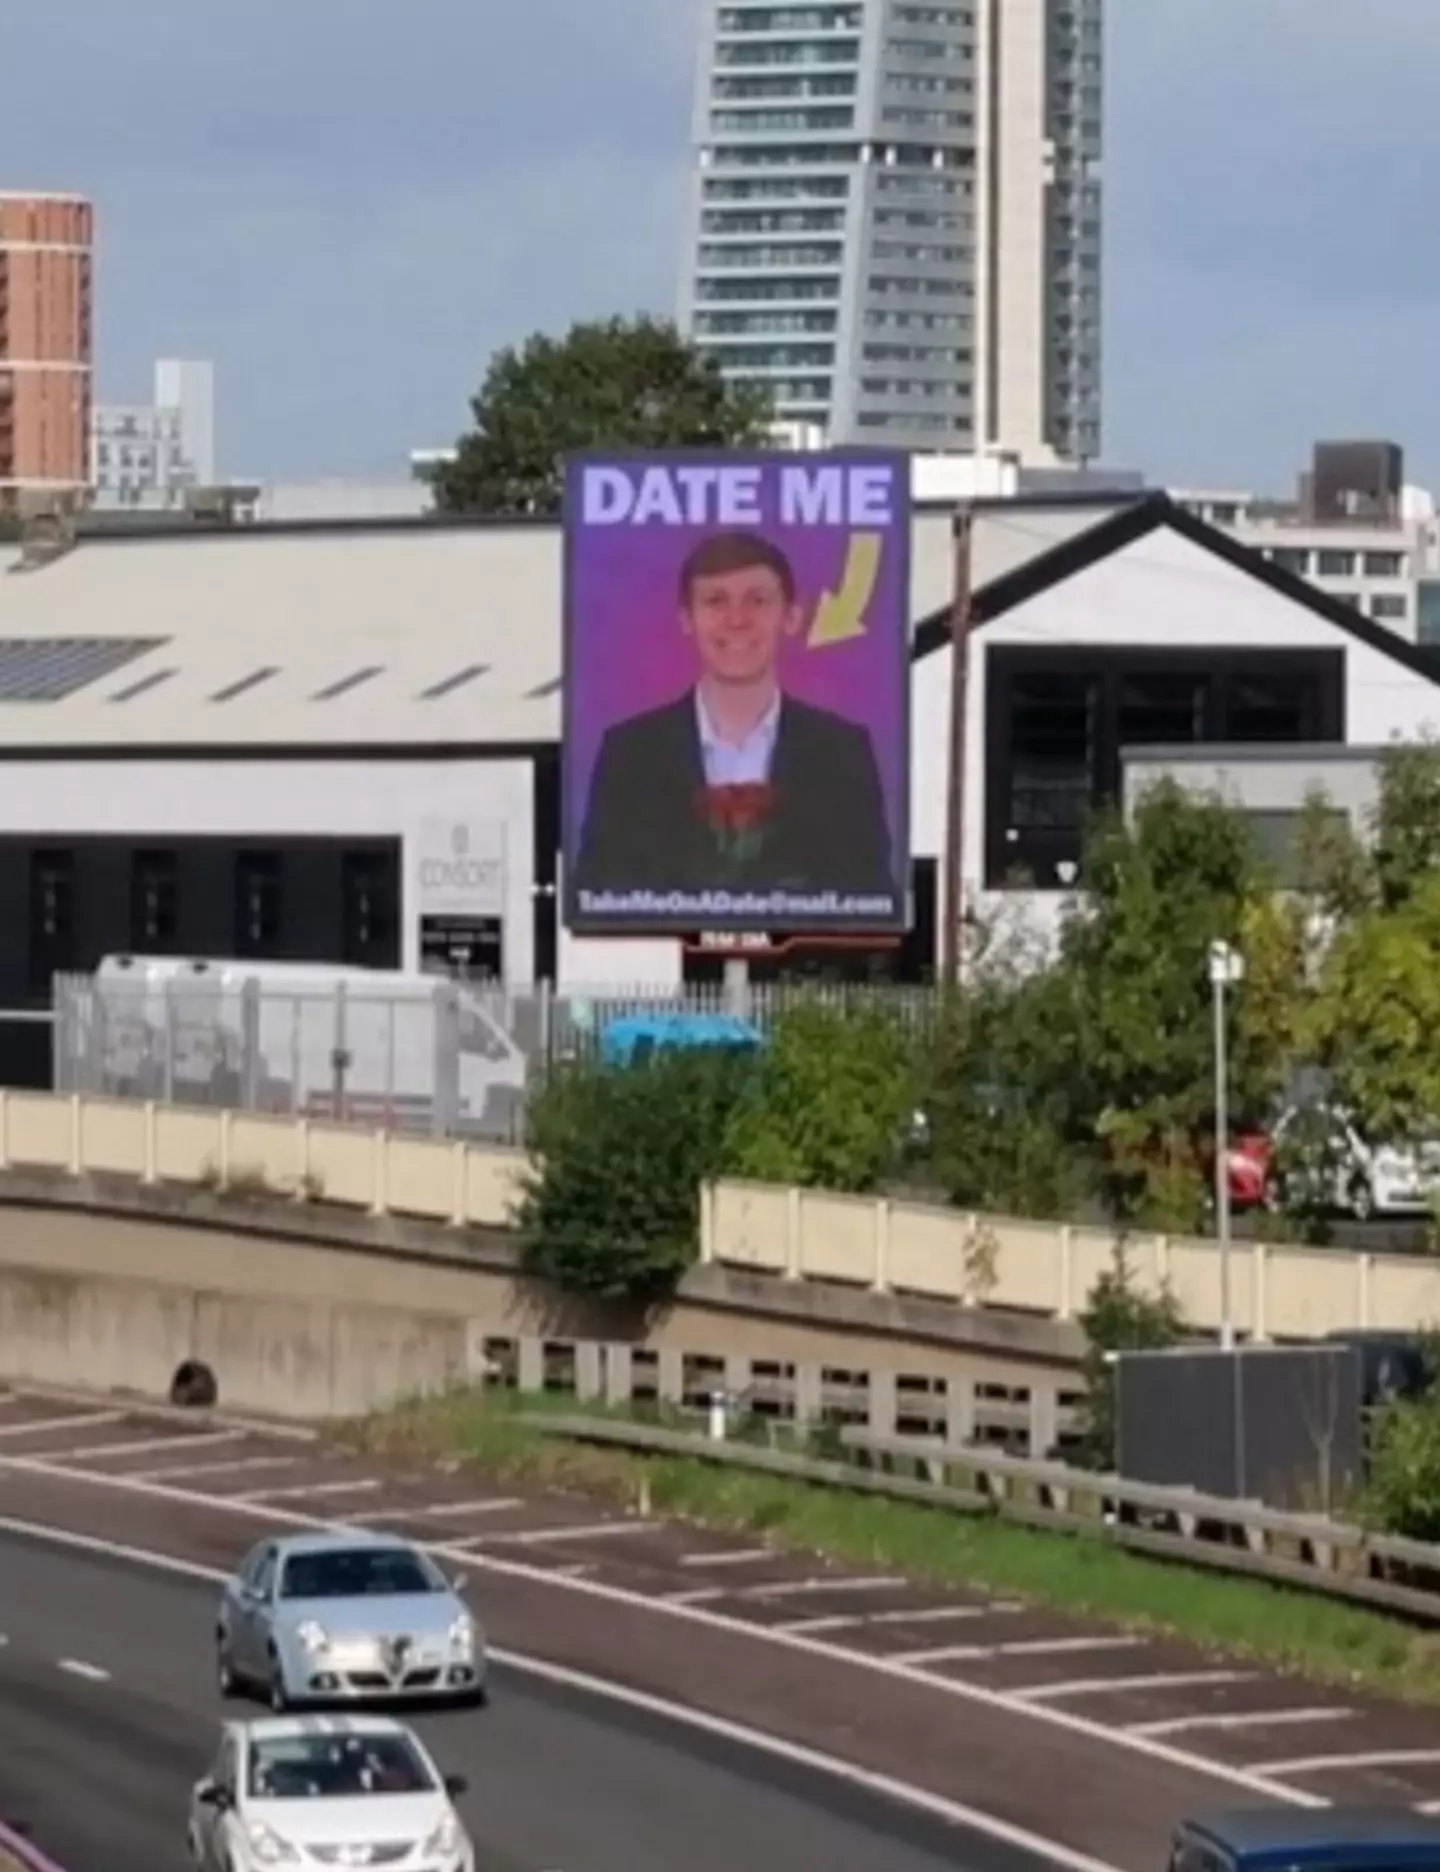 The billboard, located on the M621 motorway, was up for a week.